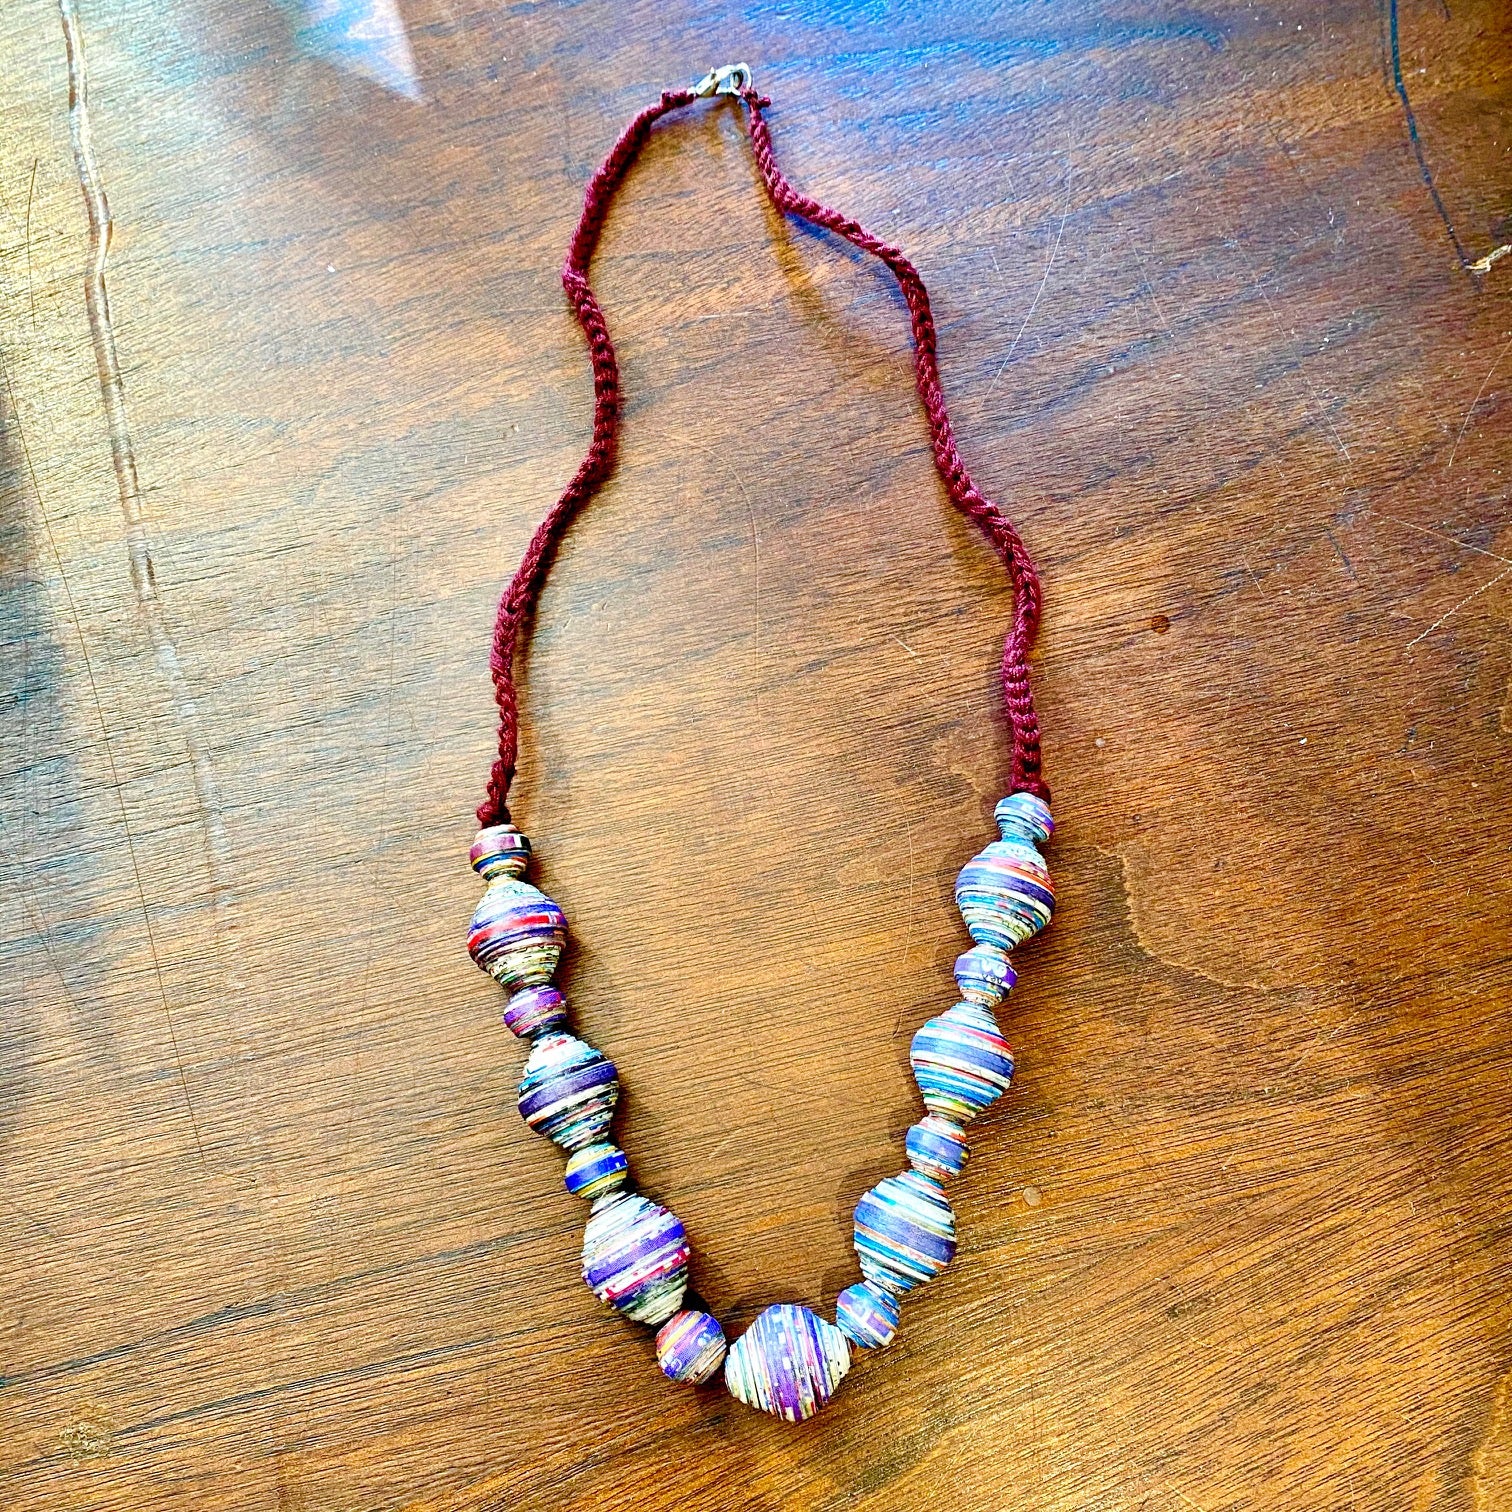 Recycled Paper Necklace from the Lao Disabled Women's Center